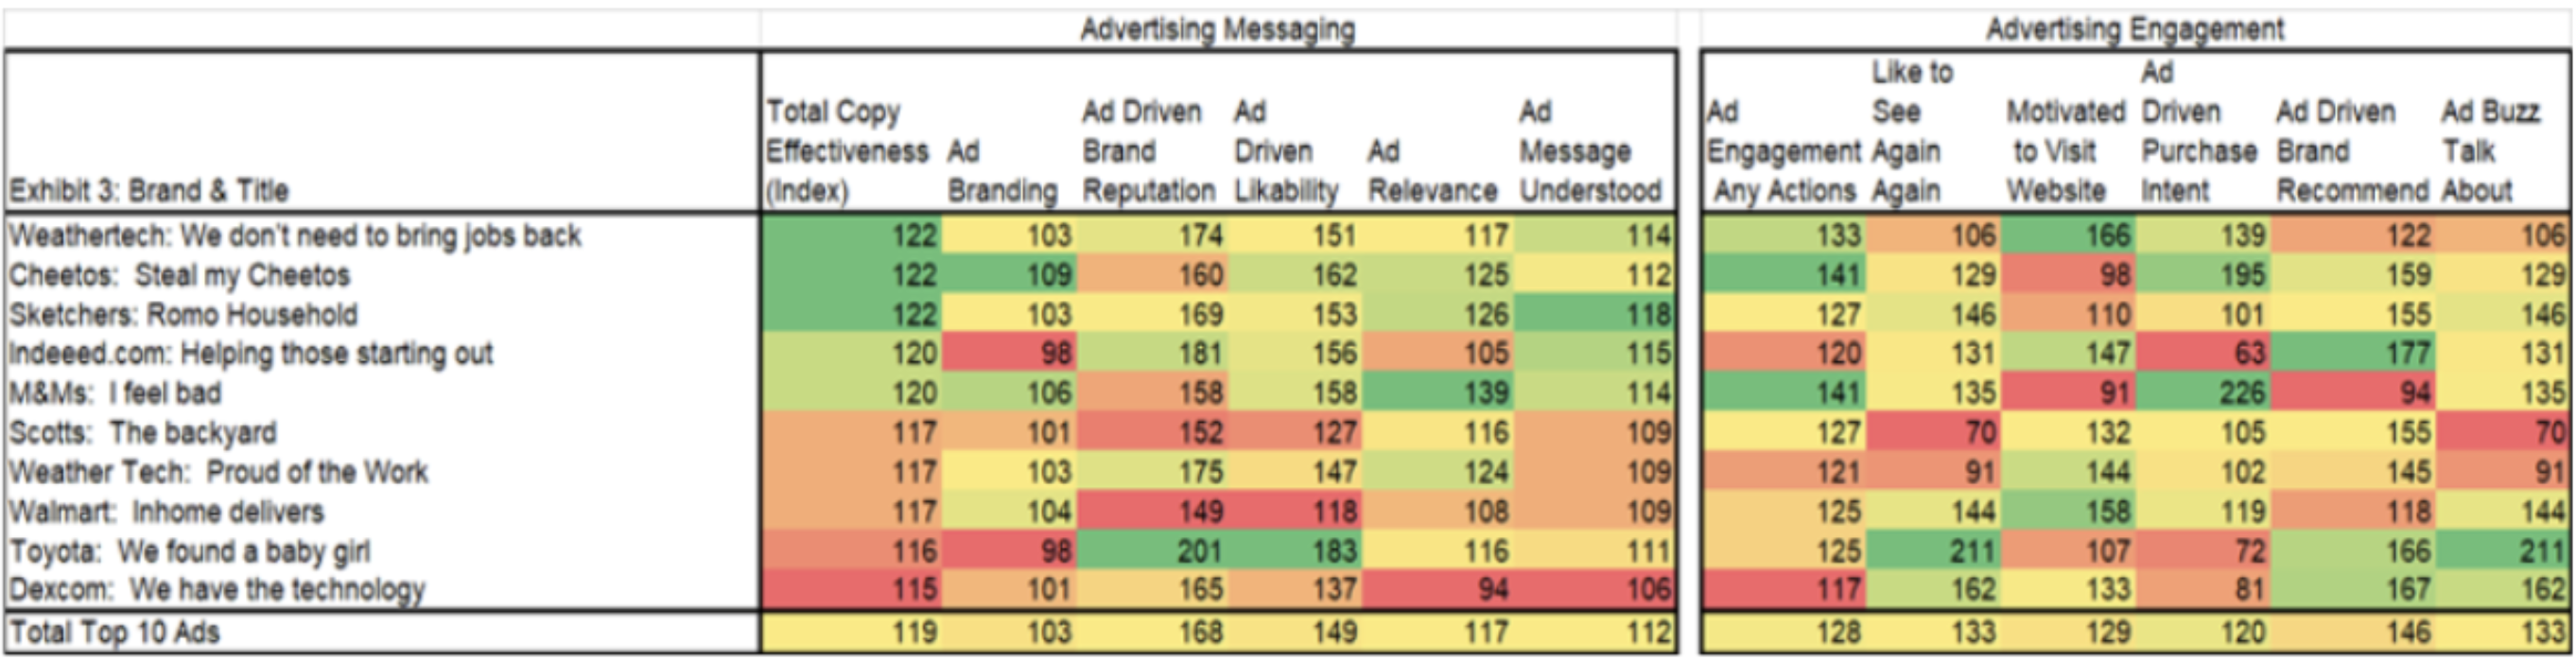 Super Bowl 2021 Advertising ABX Scores For Ad Effectiveness